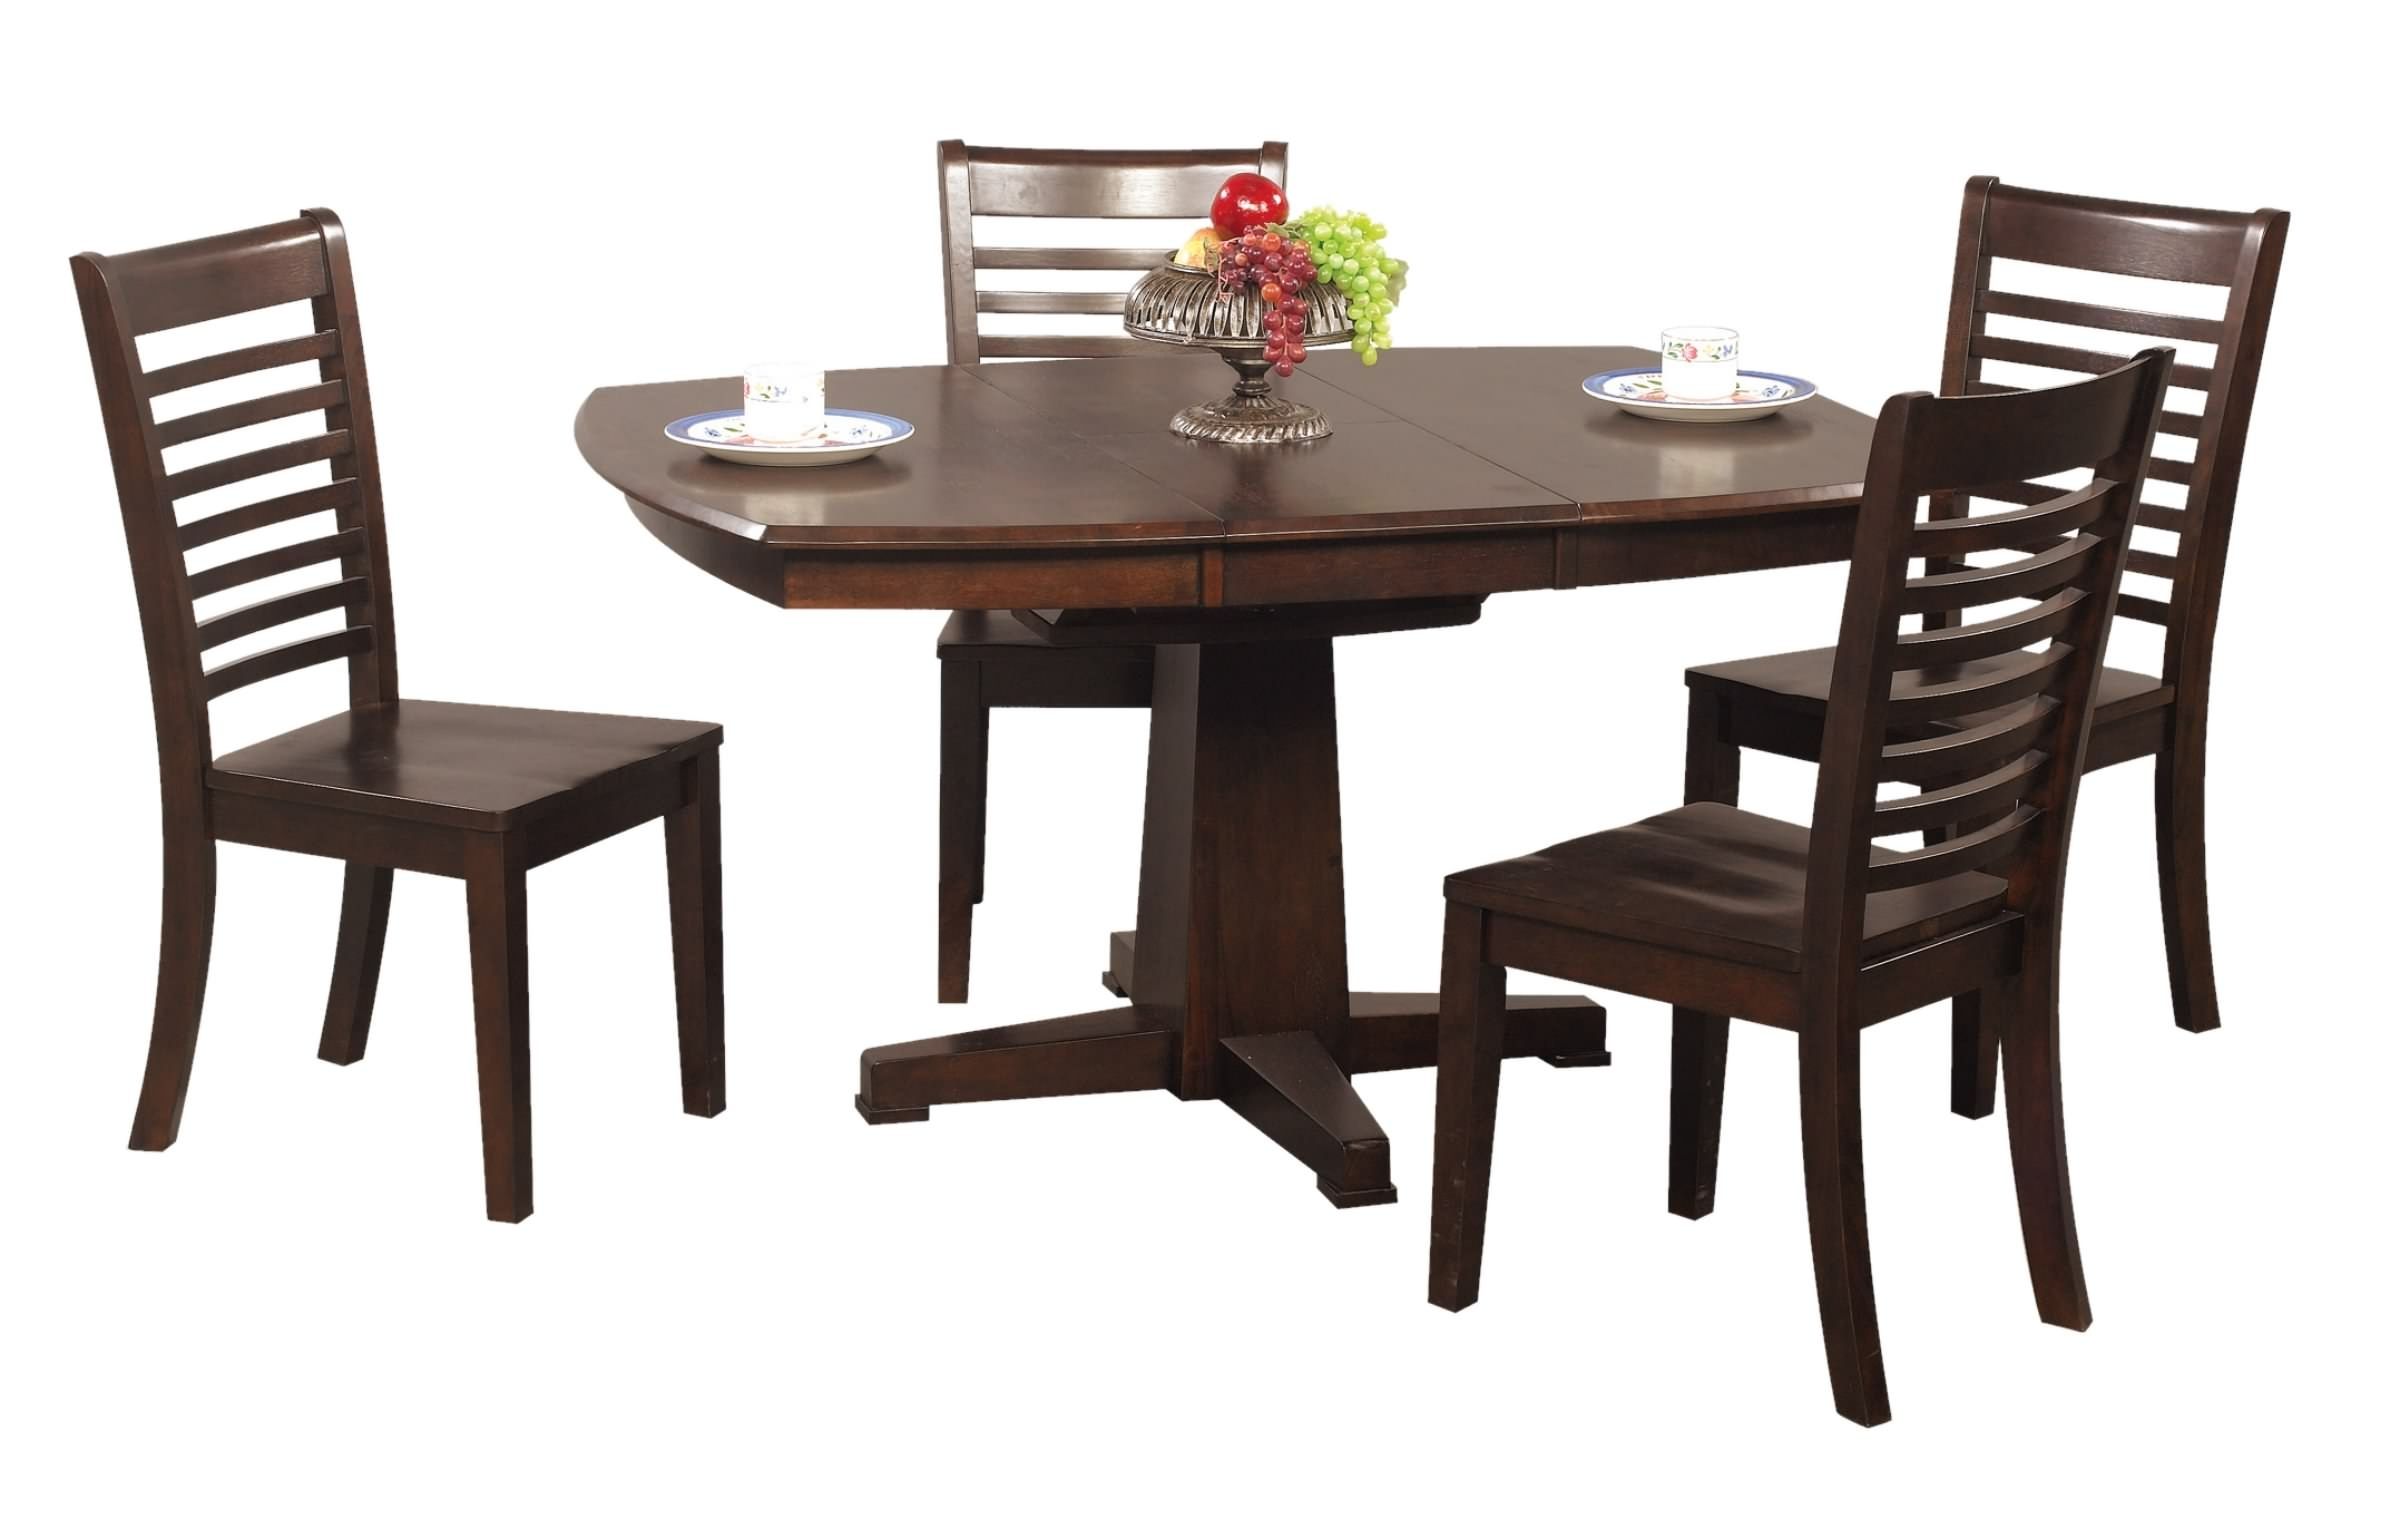 Santa Fe 42 X 57 Pedestal Table – Fanny's Furniture & Kitchens With Most Recent Jaxon 5 Piece Extension Counter Sets With Wood Stools (View 16 of 20)